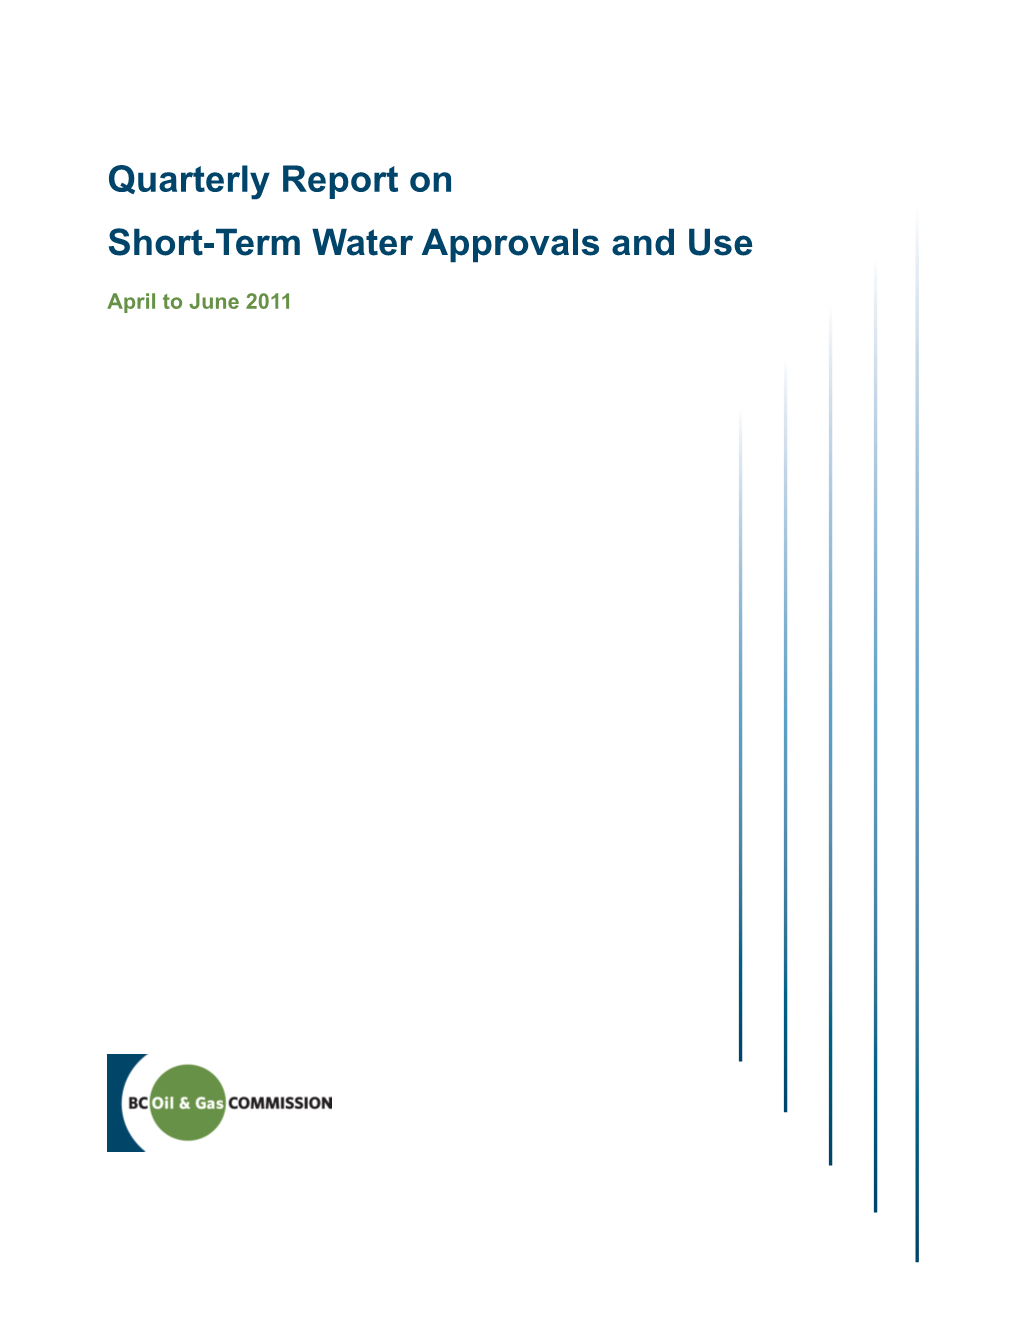 Quarterly Report on Short-Term Water Approvals and Use